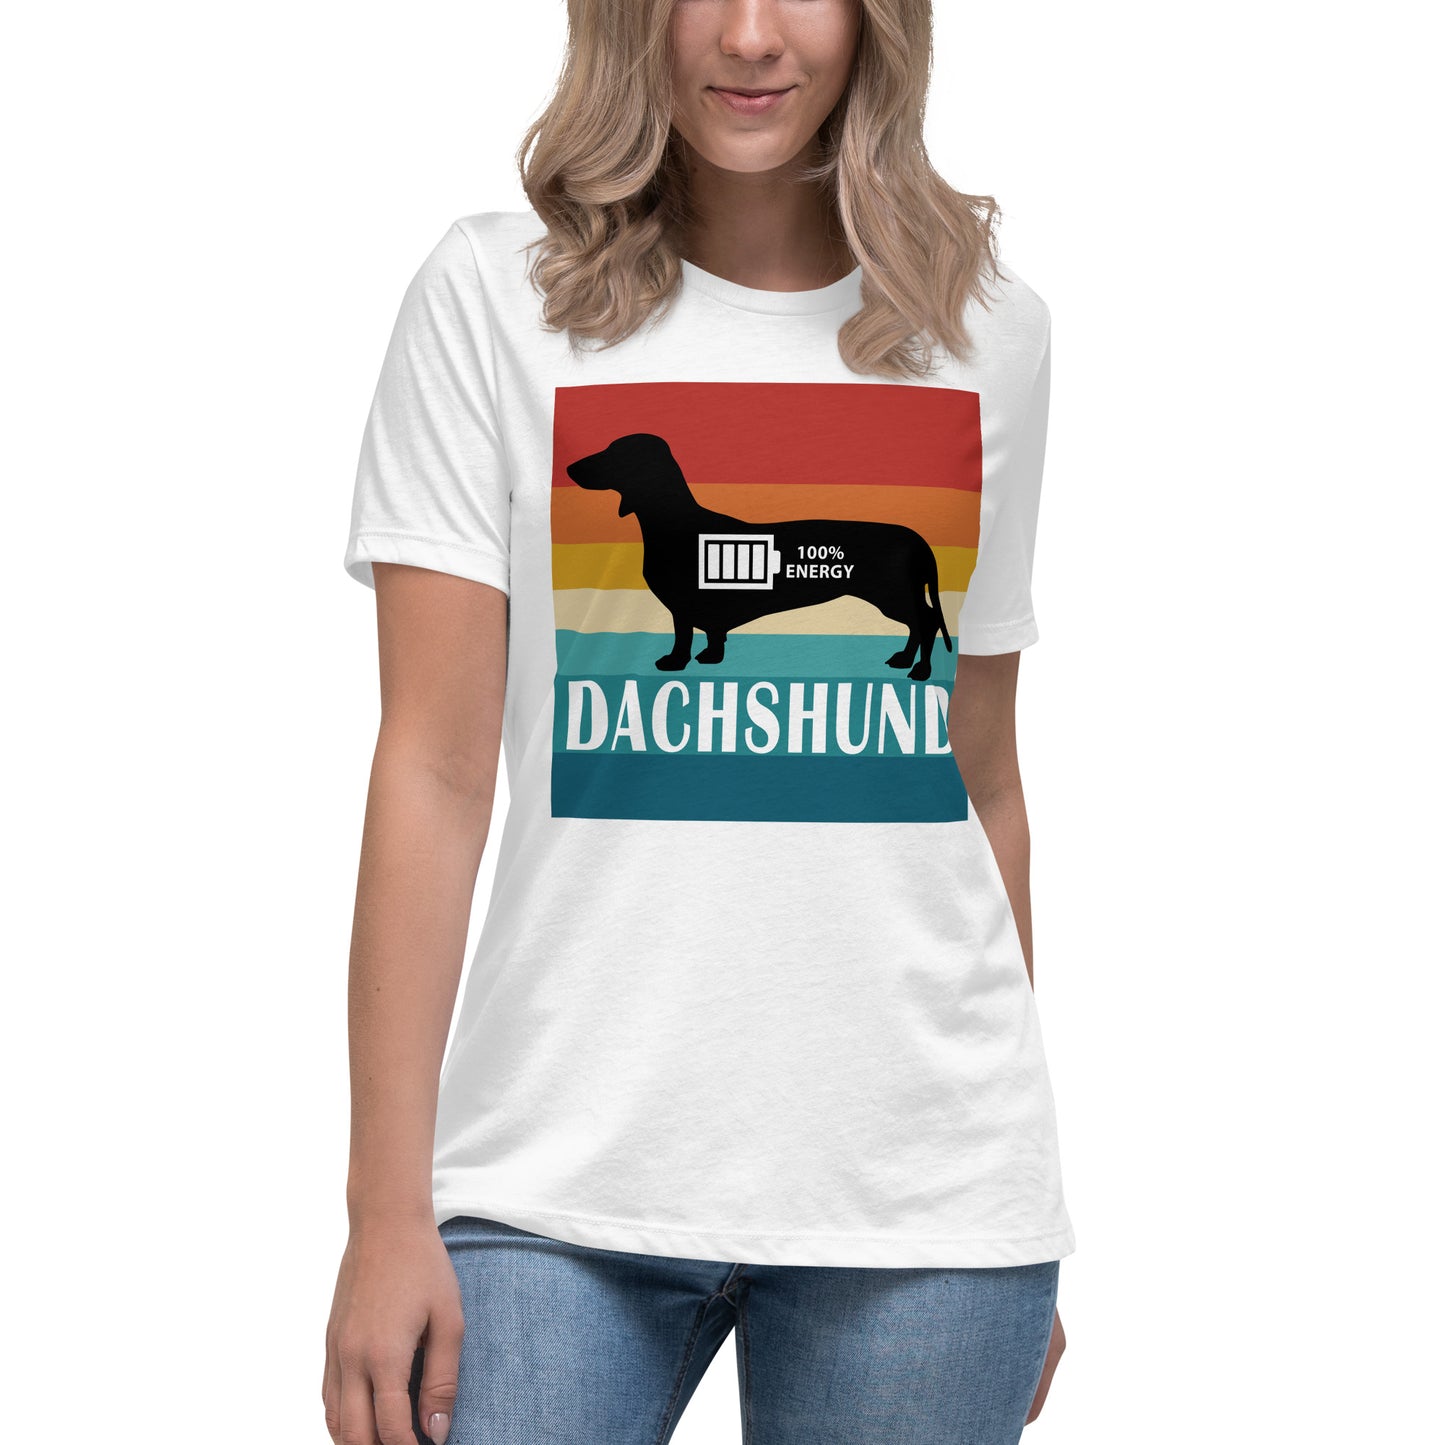 Dachshund 100% Energy Women's Relaxed T-Shirt by Dog Artistry